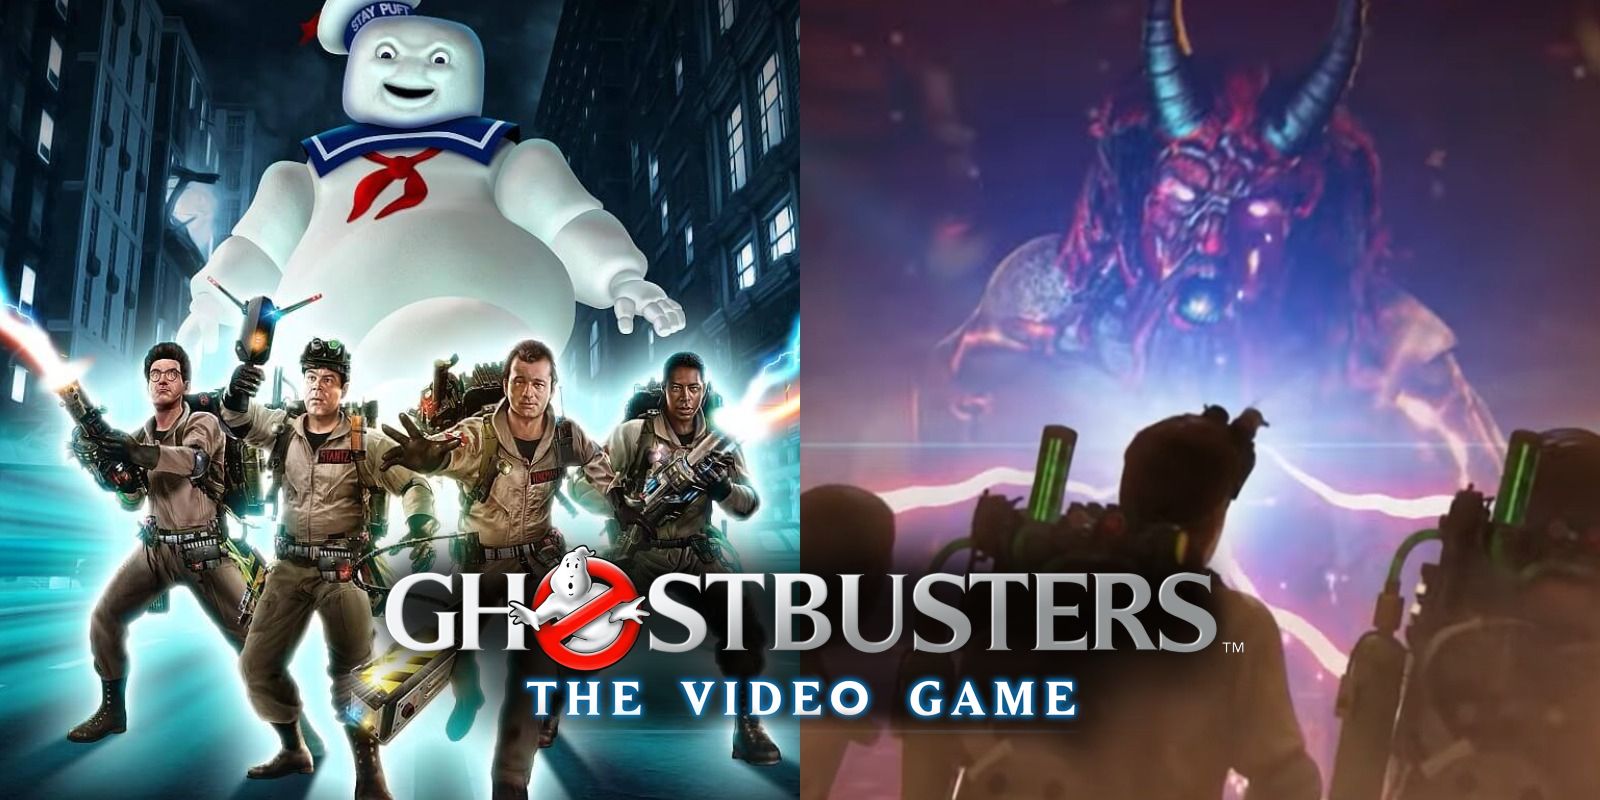 10 Ways Ghostbusters The Video Game Is A Great Sequel To The Movies